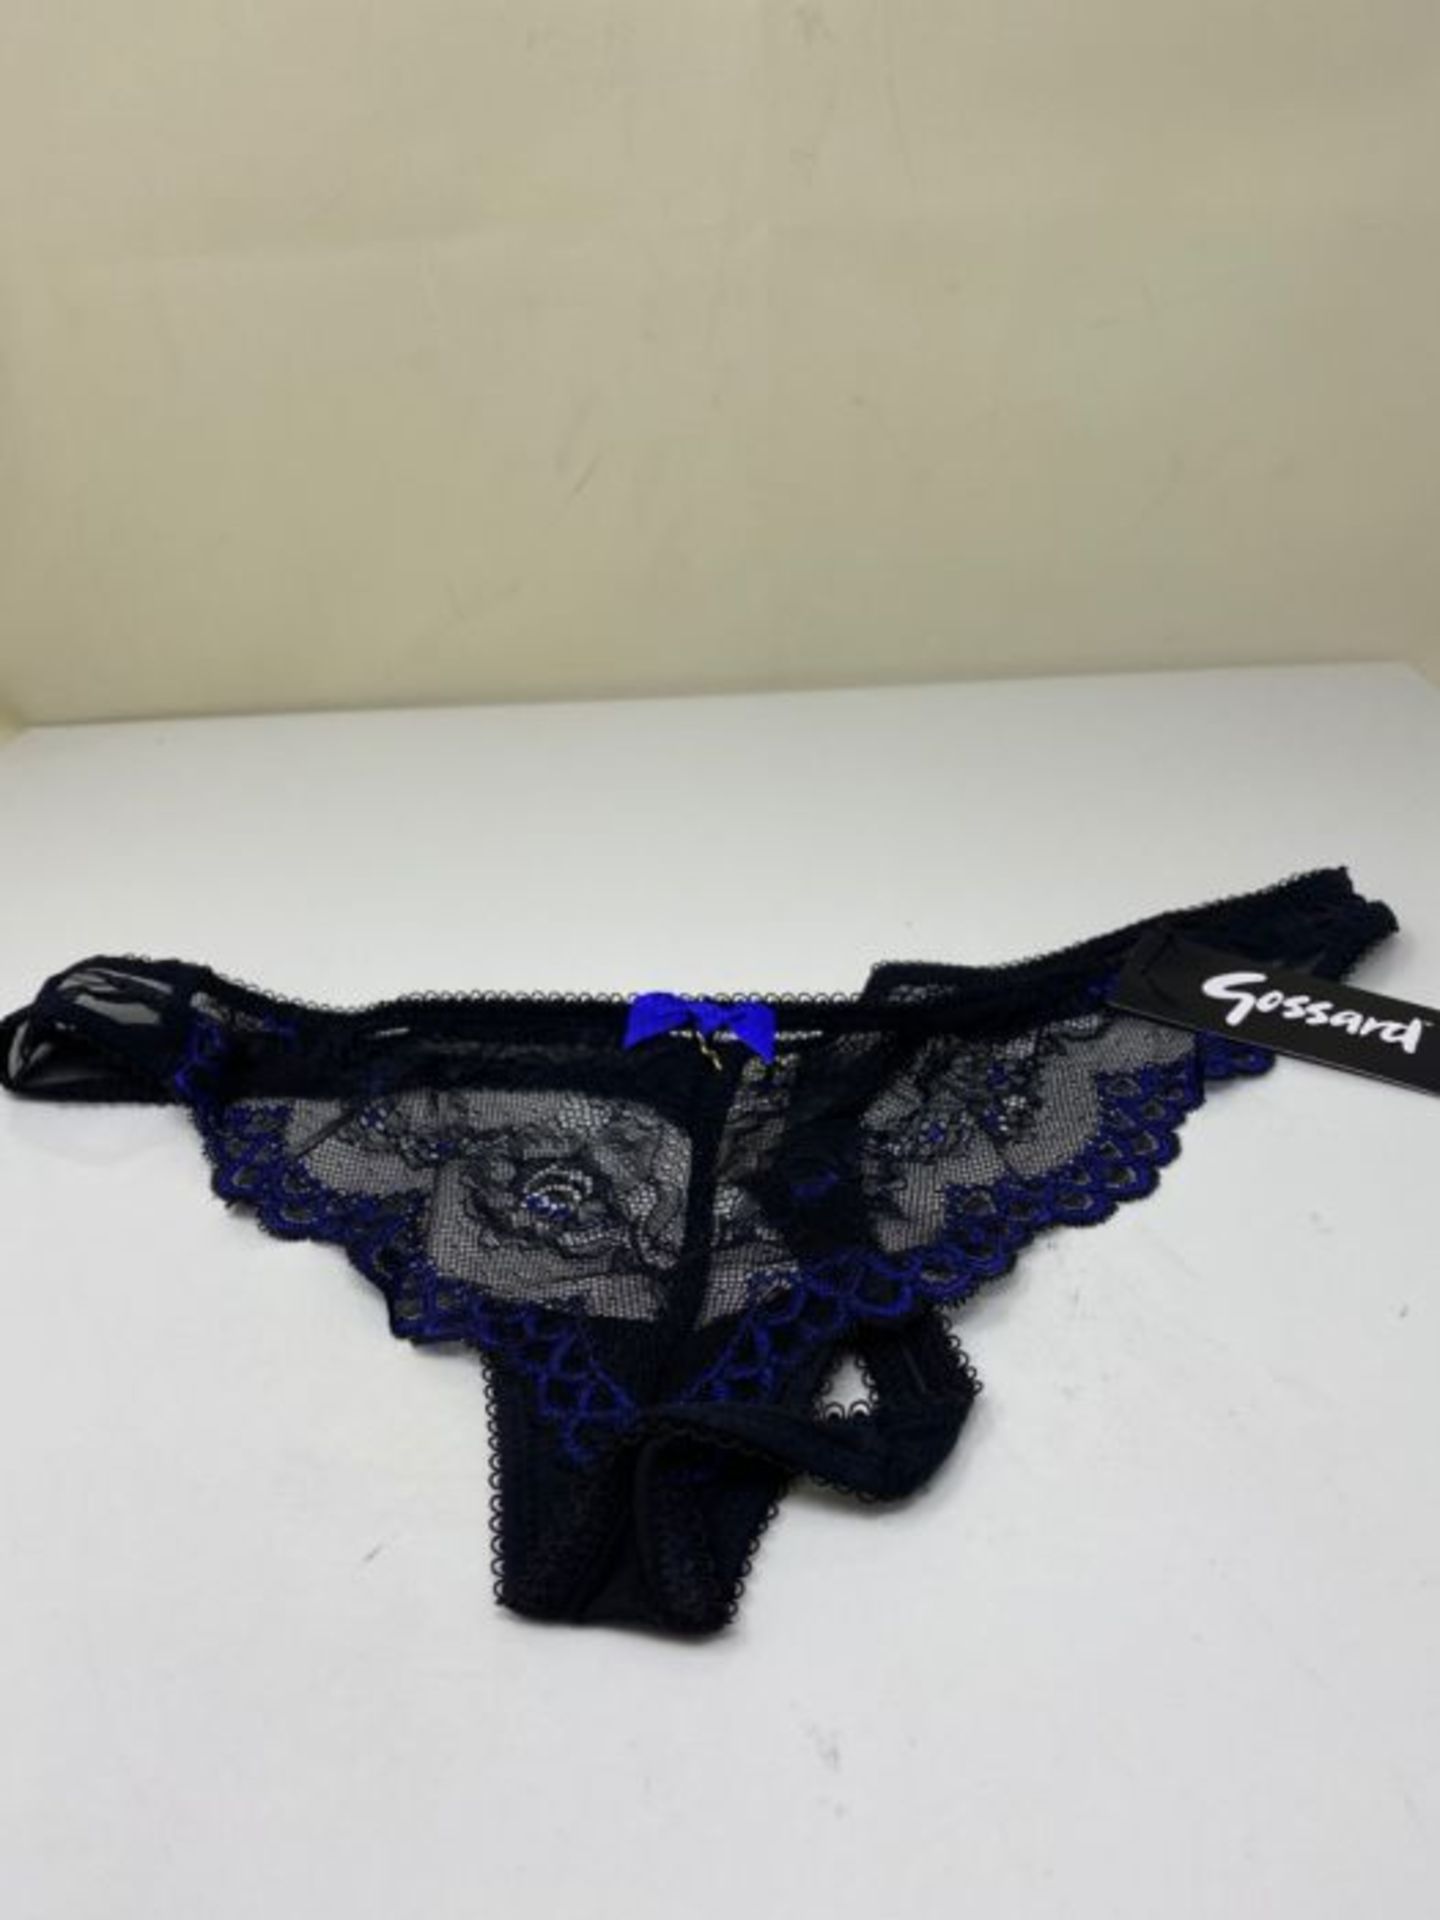 Gossard Women's Superboost Lace Thong Panties, Black/Electric Blue, Extra Small - Image 2 of 4